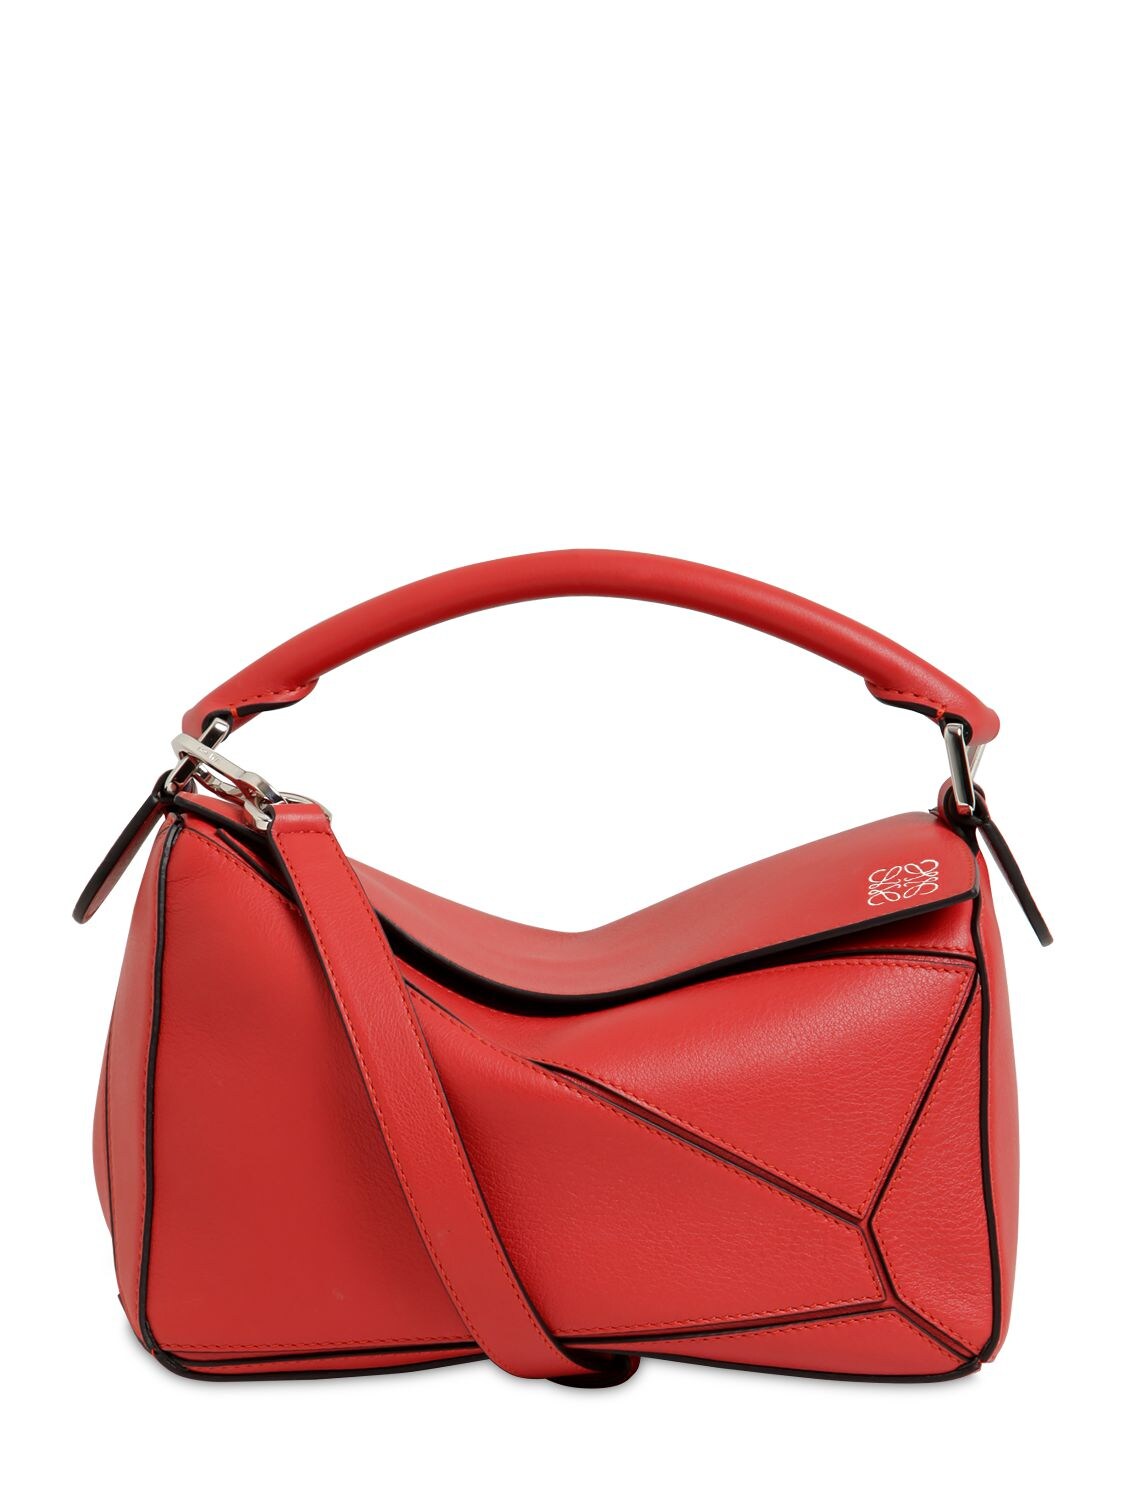 Loewe Small Puzzle Leather Top Handle Bag In Pomodoro